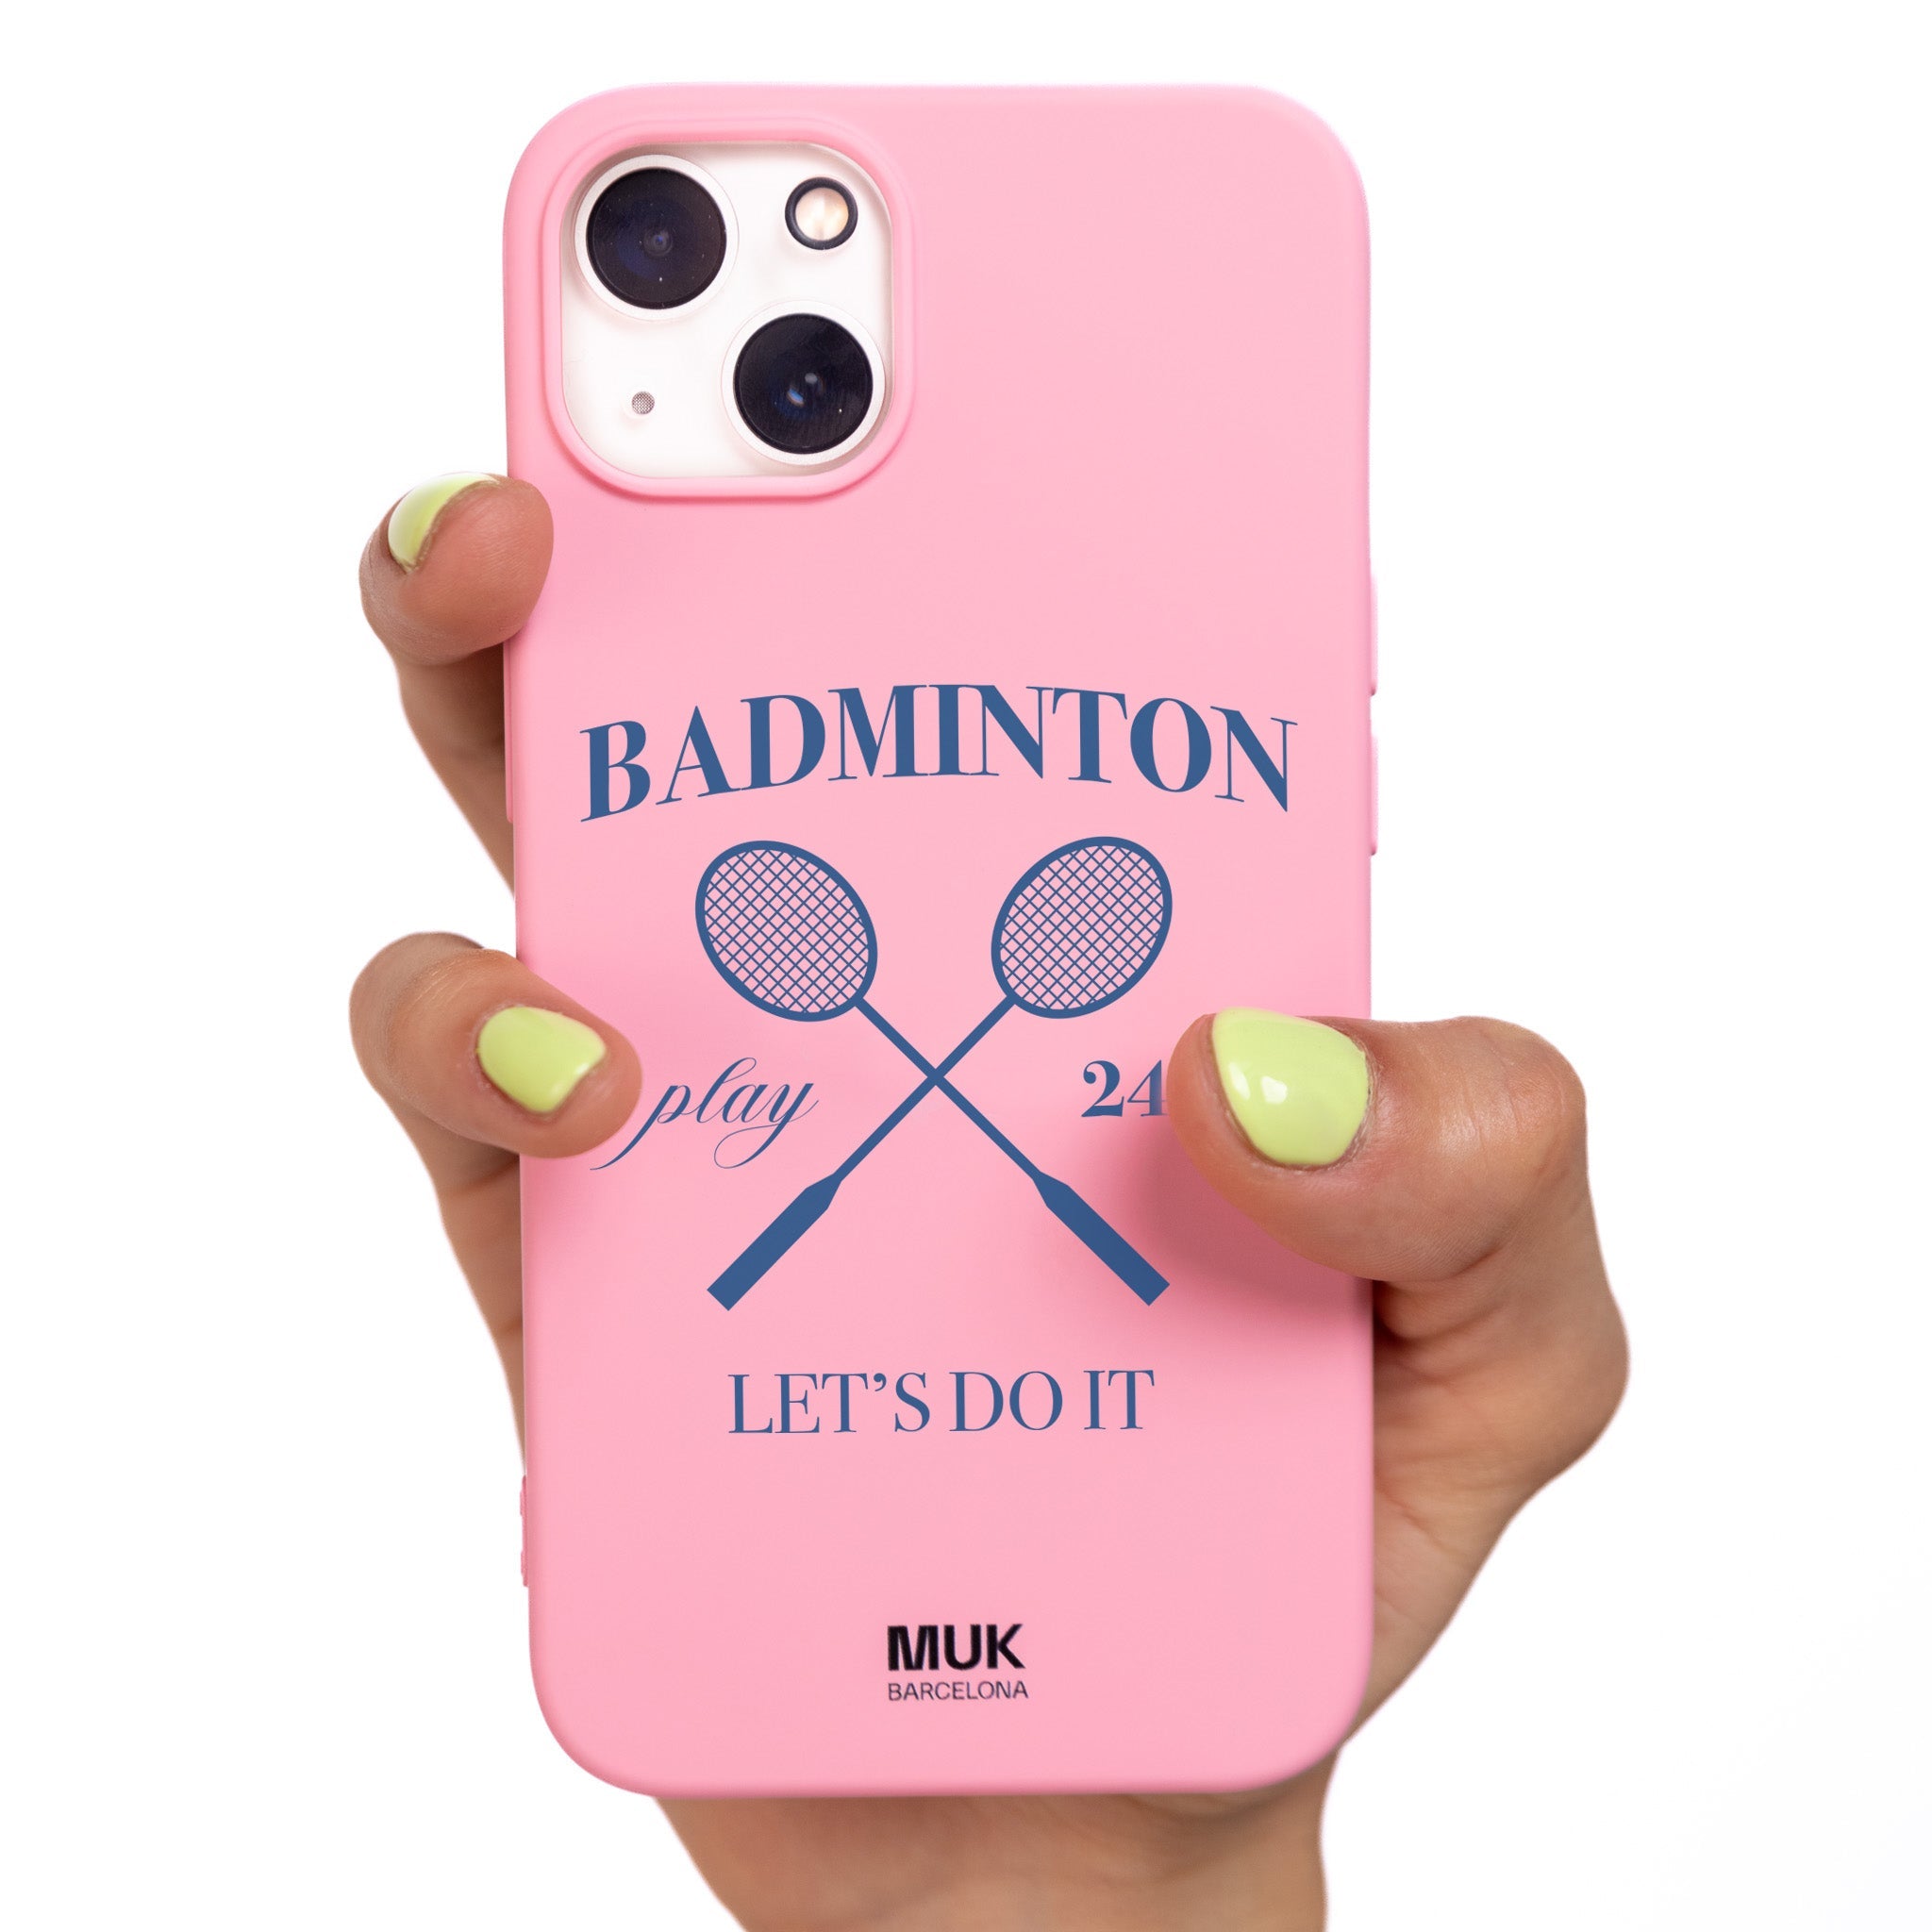 Pink TPU  case with blue badminton rackets design.
